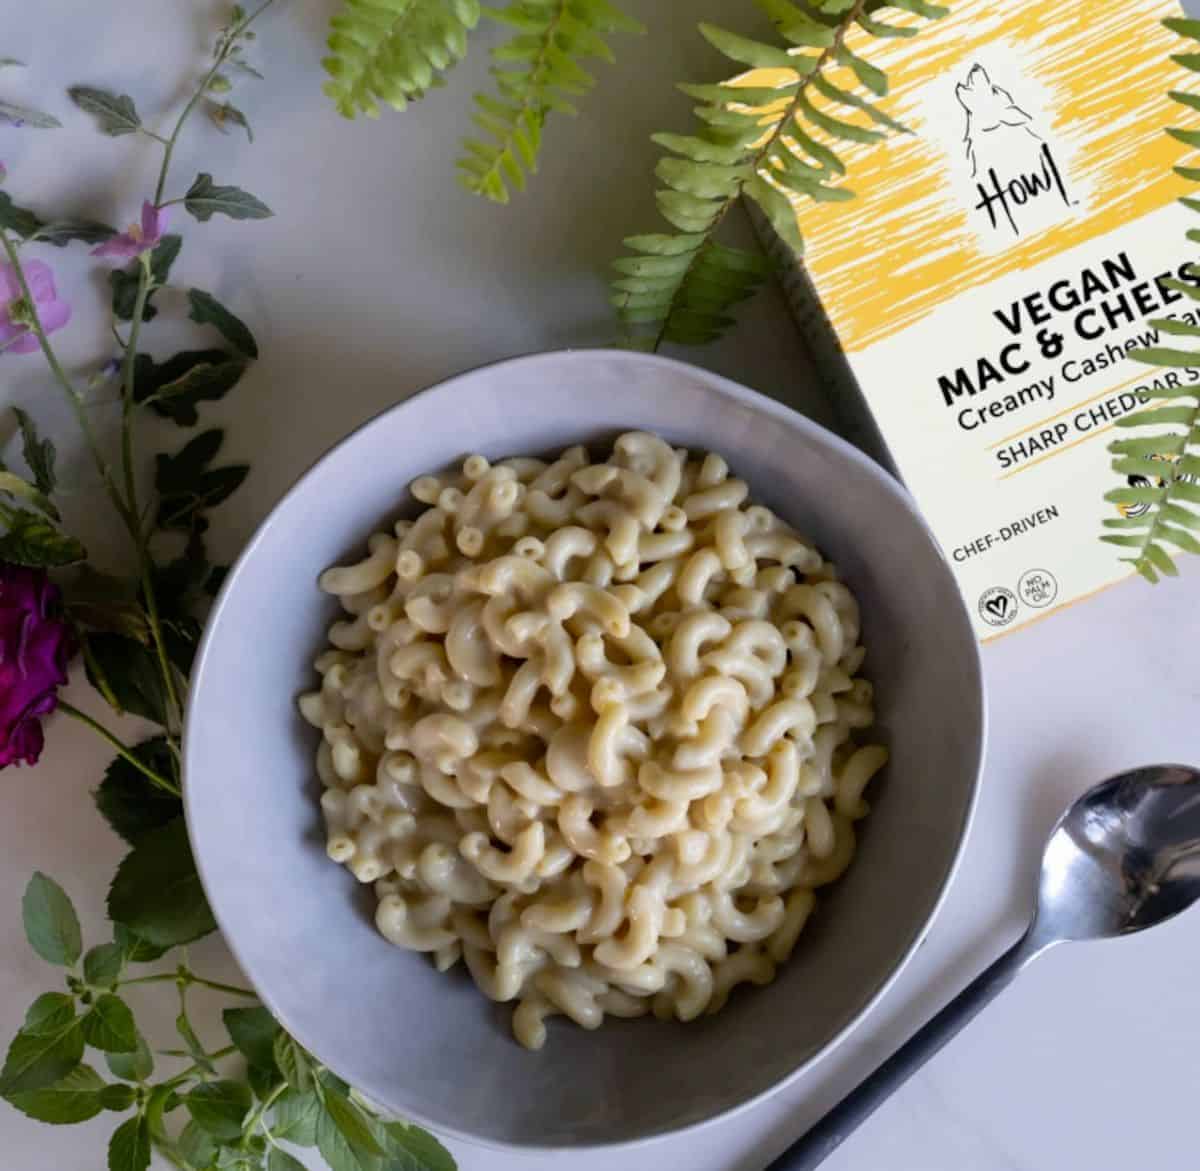 A creamy bowl of Howl's vegan mac and cheese next to a spoon and the box of packaging.